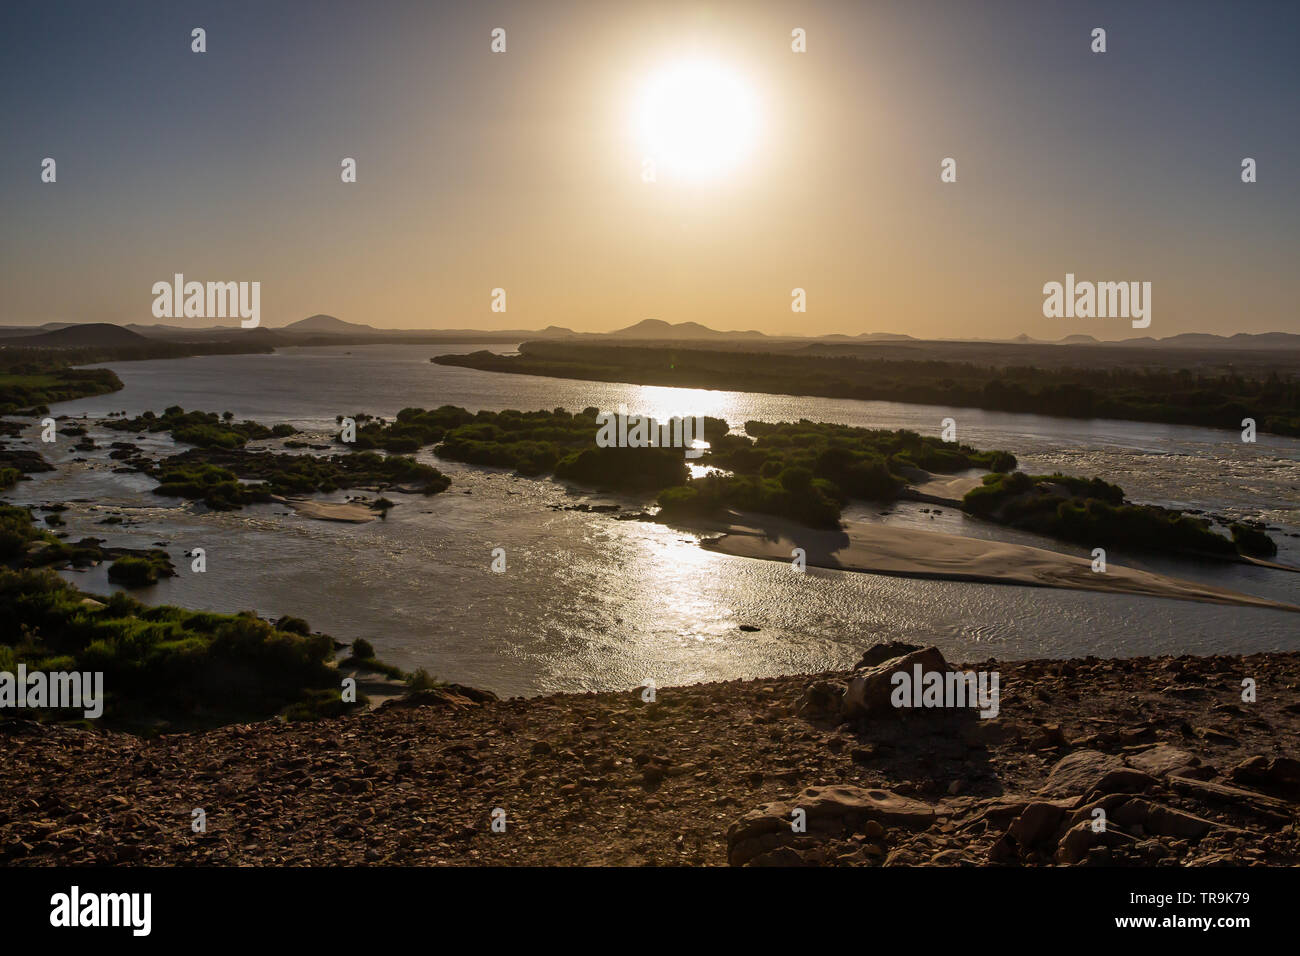 The early evening sun is reflected brightly in the waters of the third cataract of the river Nile in the Nubian region of Sudan Stock Photo